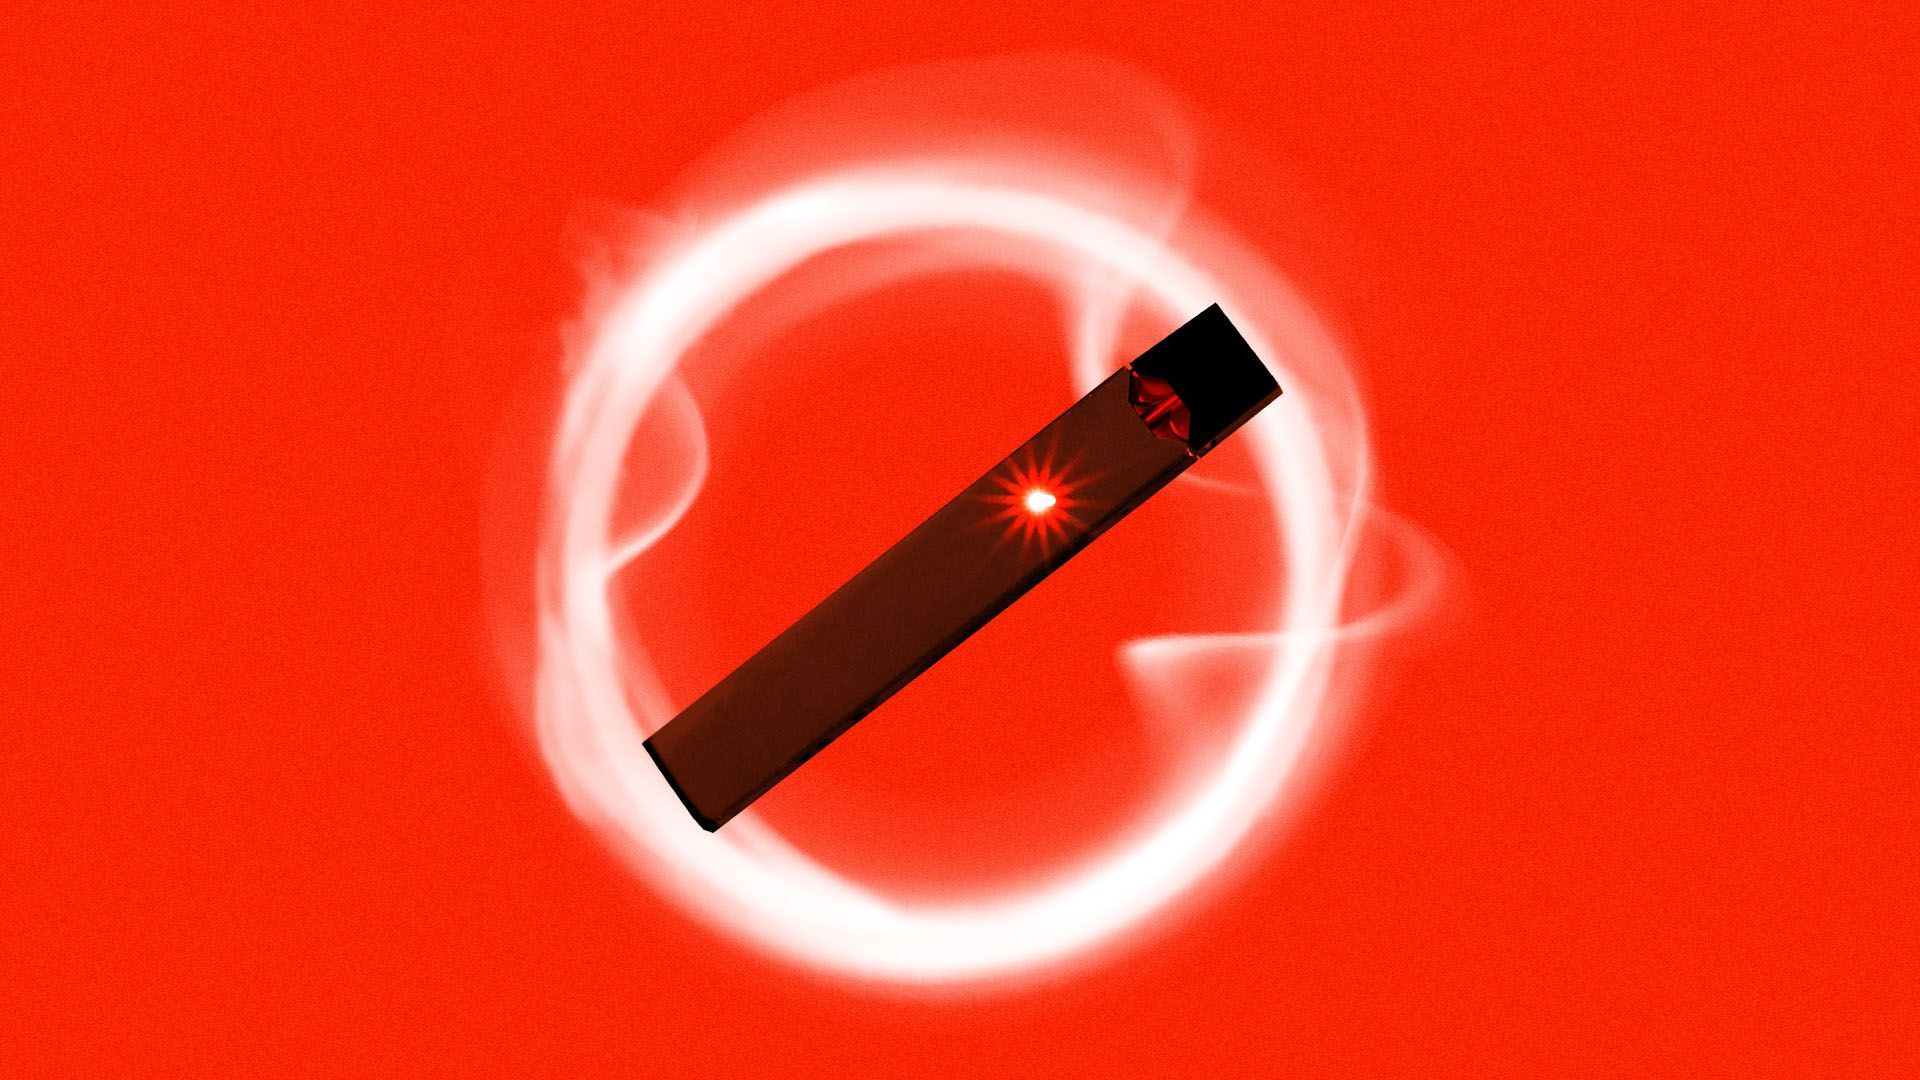 Illustration of a juul device forming a 